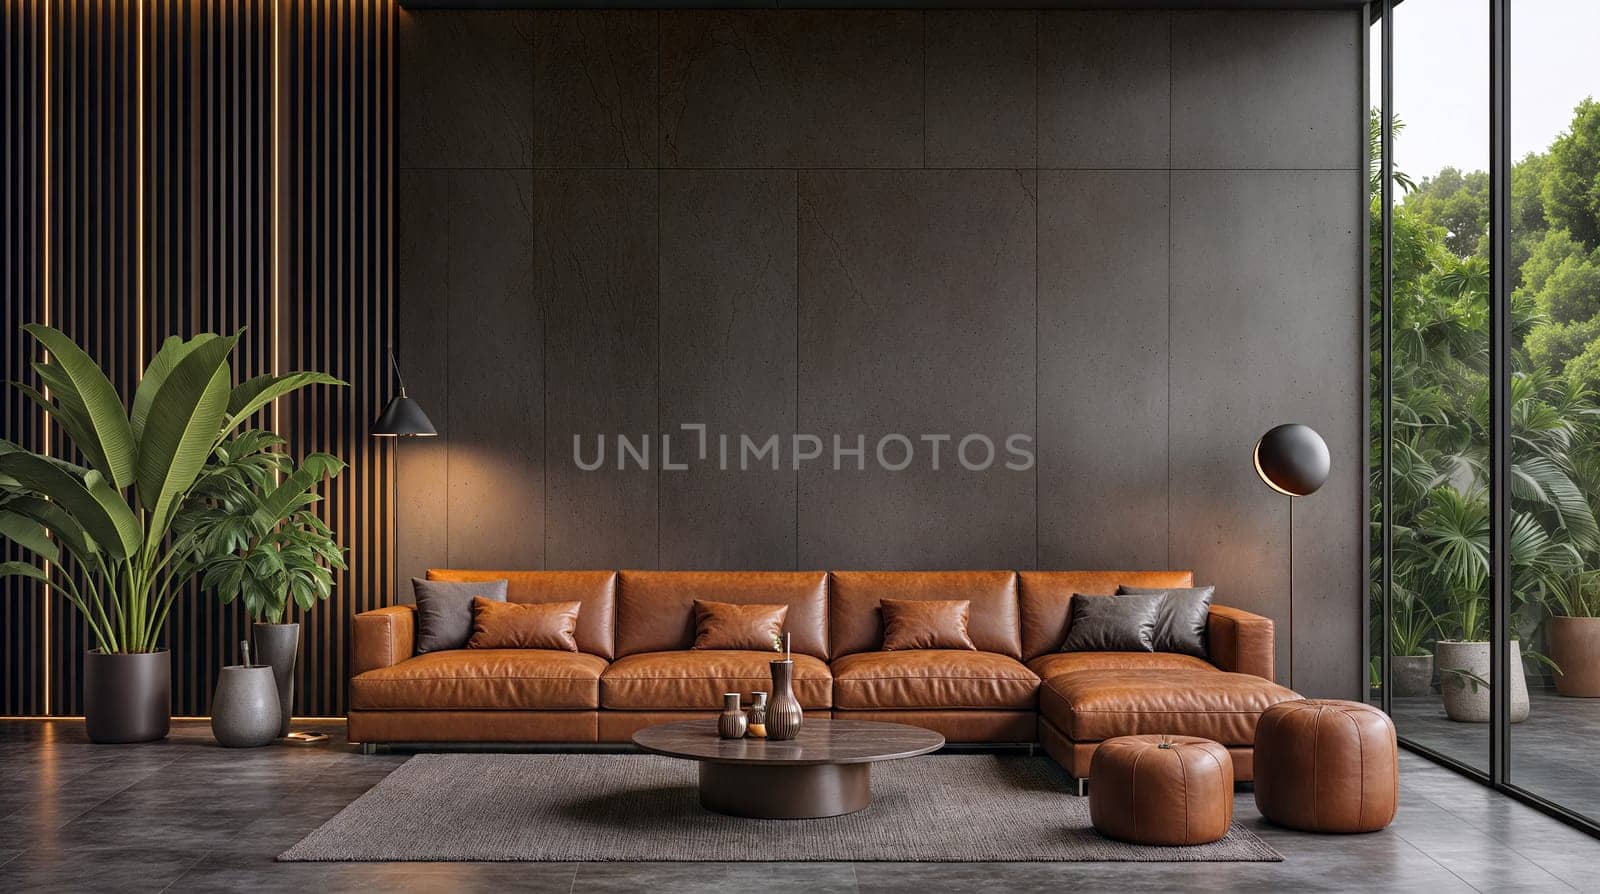 Modern Living Room Design With Spacious Layout and Luxurious Leather Sofa by chrisroll